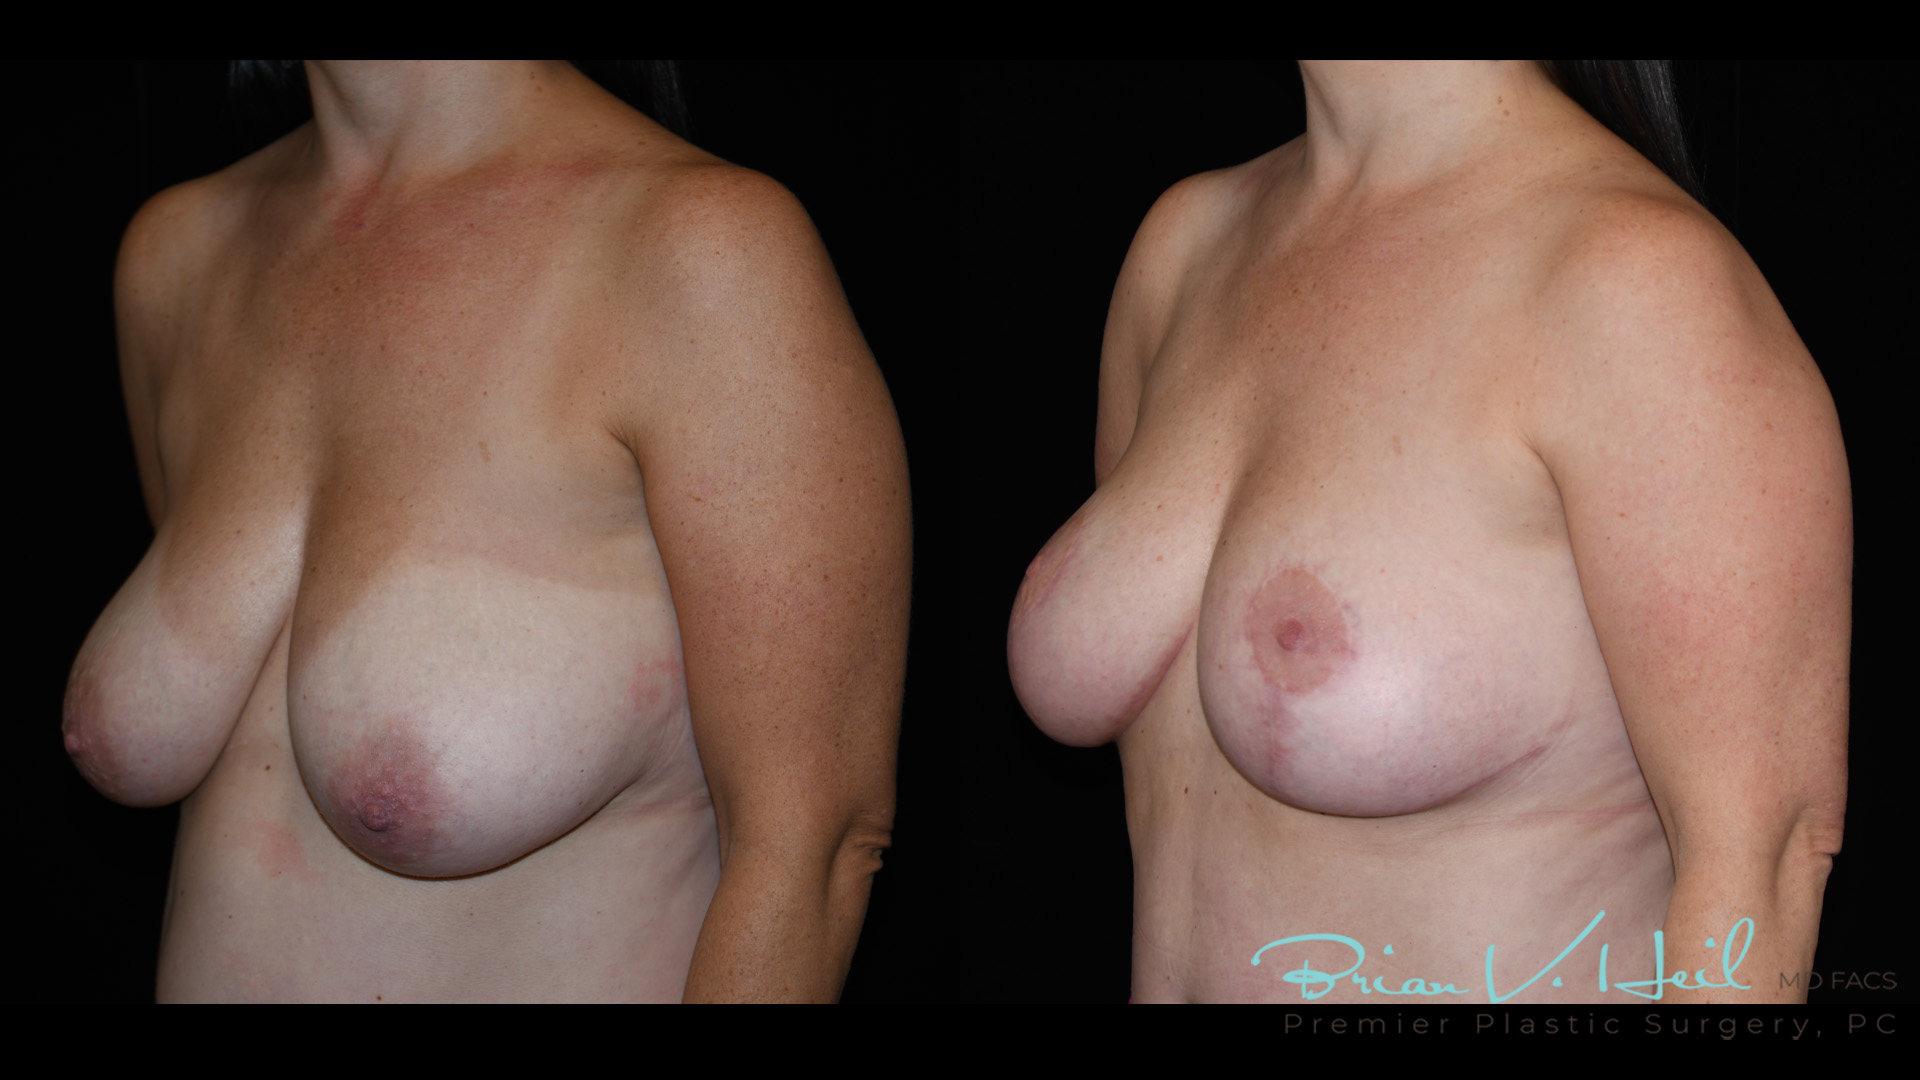 Breast Lift Before and After | Premier Plastic Surgery